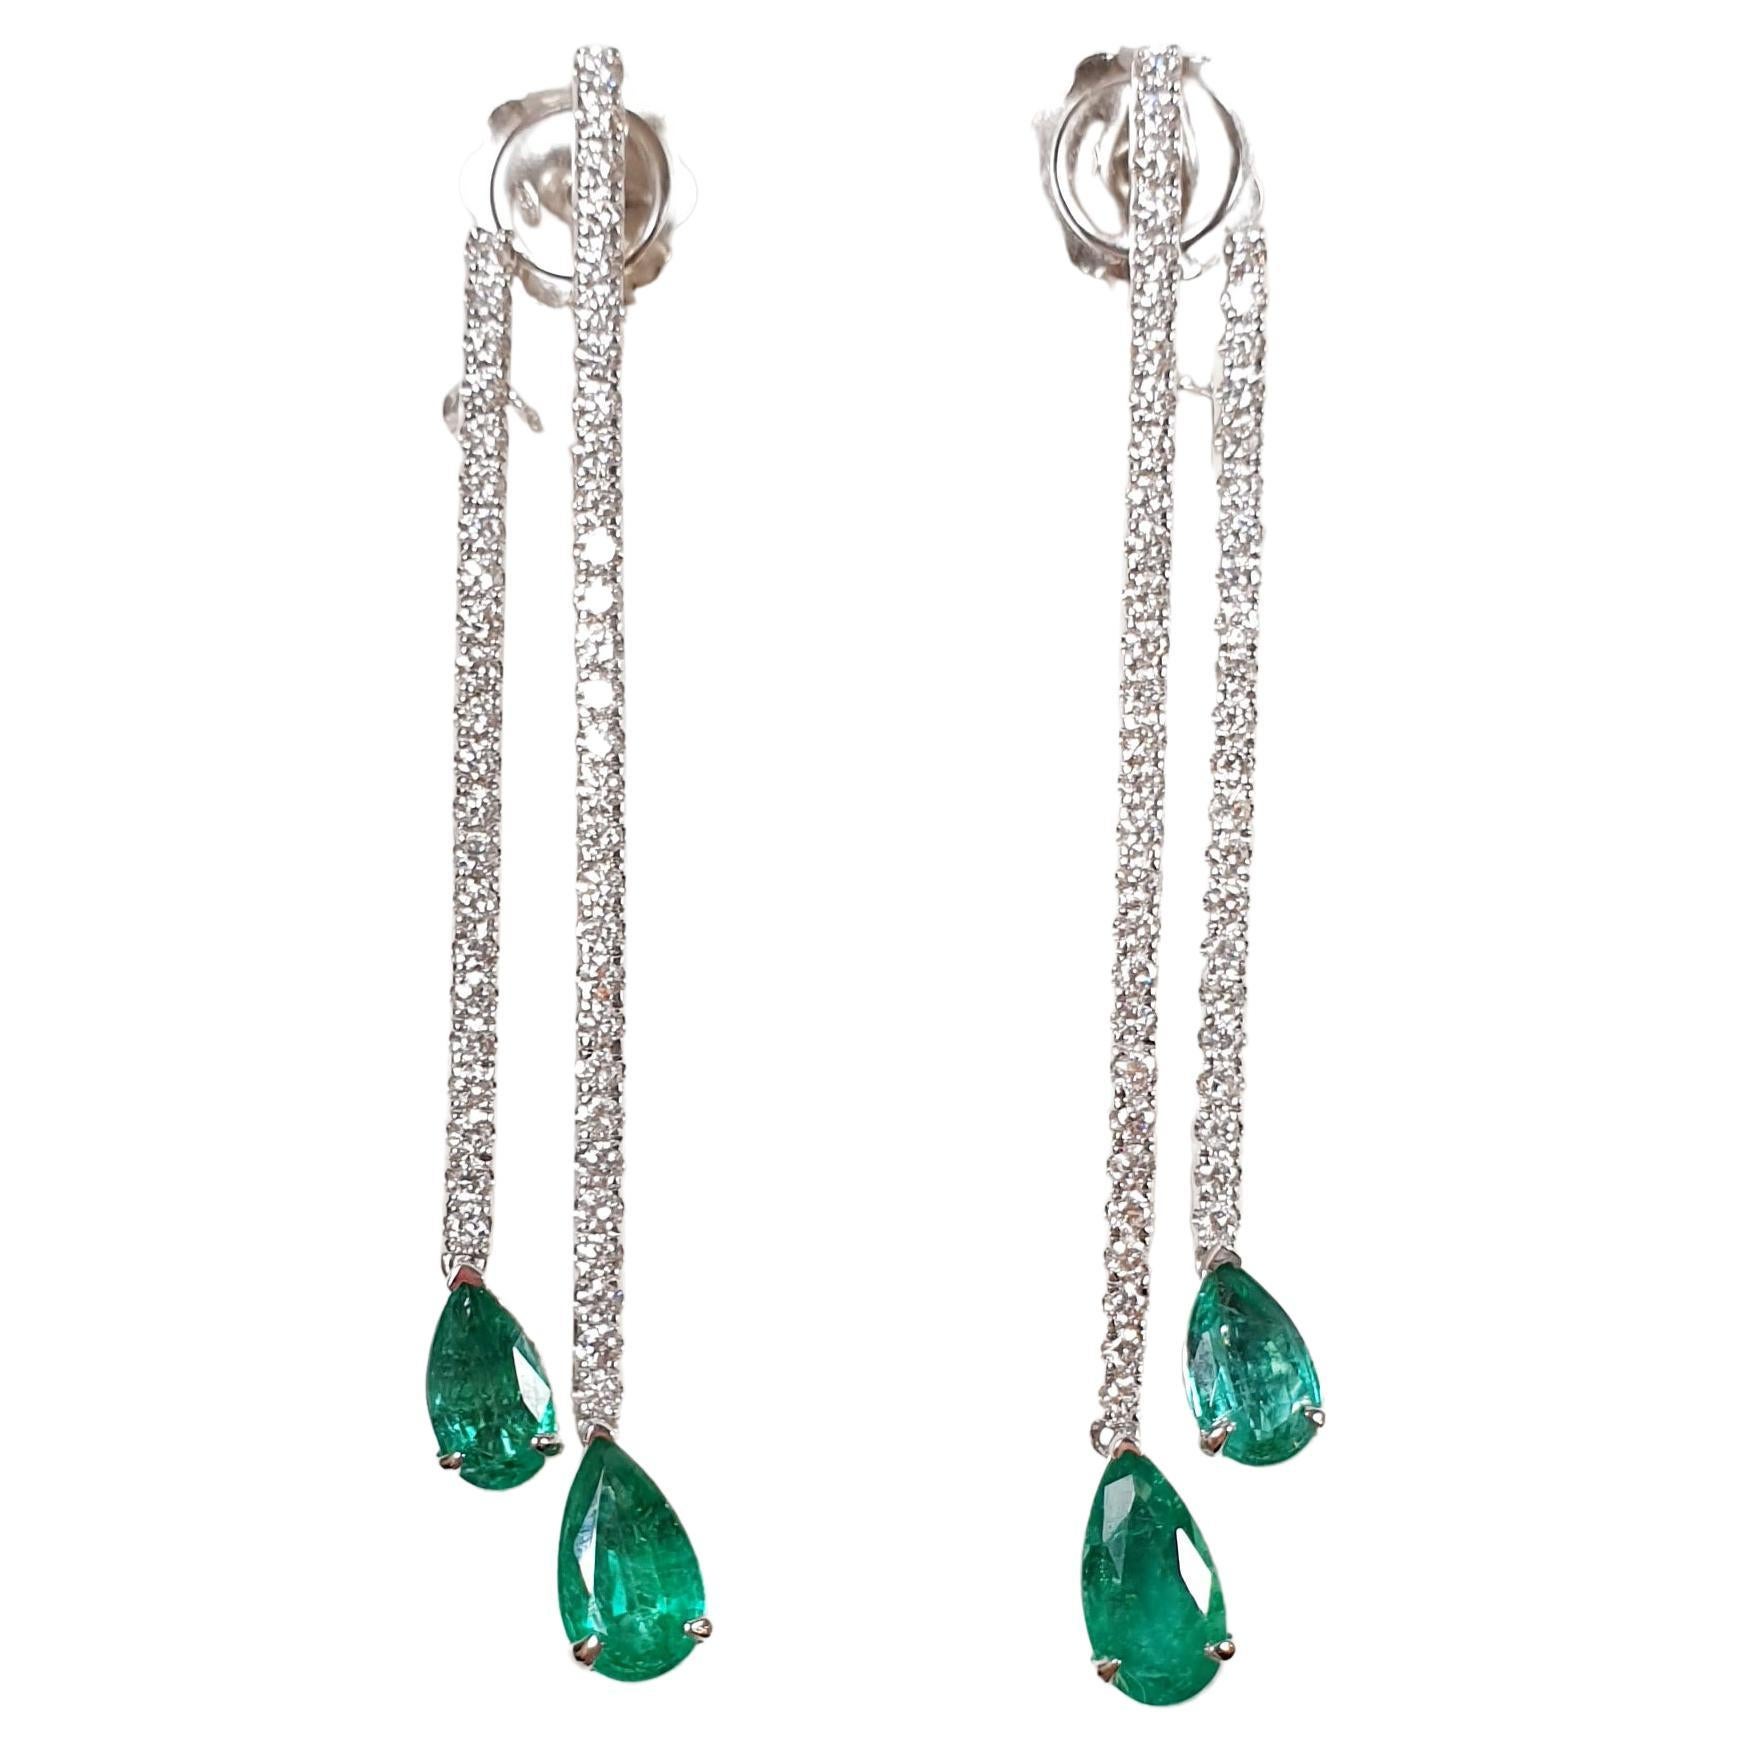 Colombian Emerald Earrings with Diamonds and White Gold